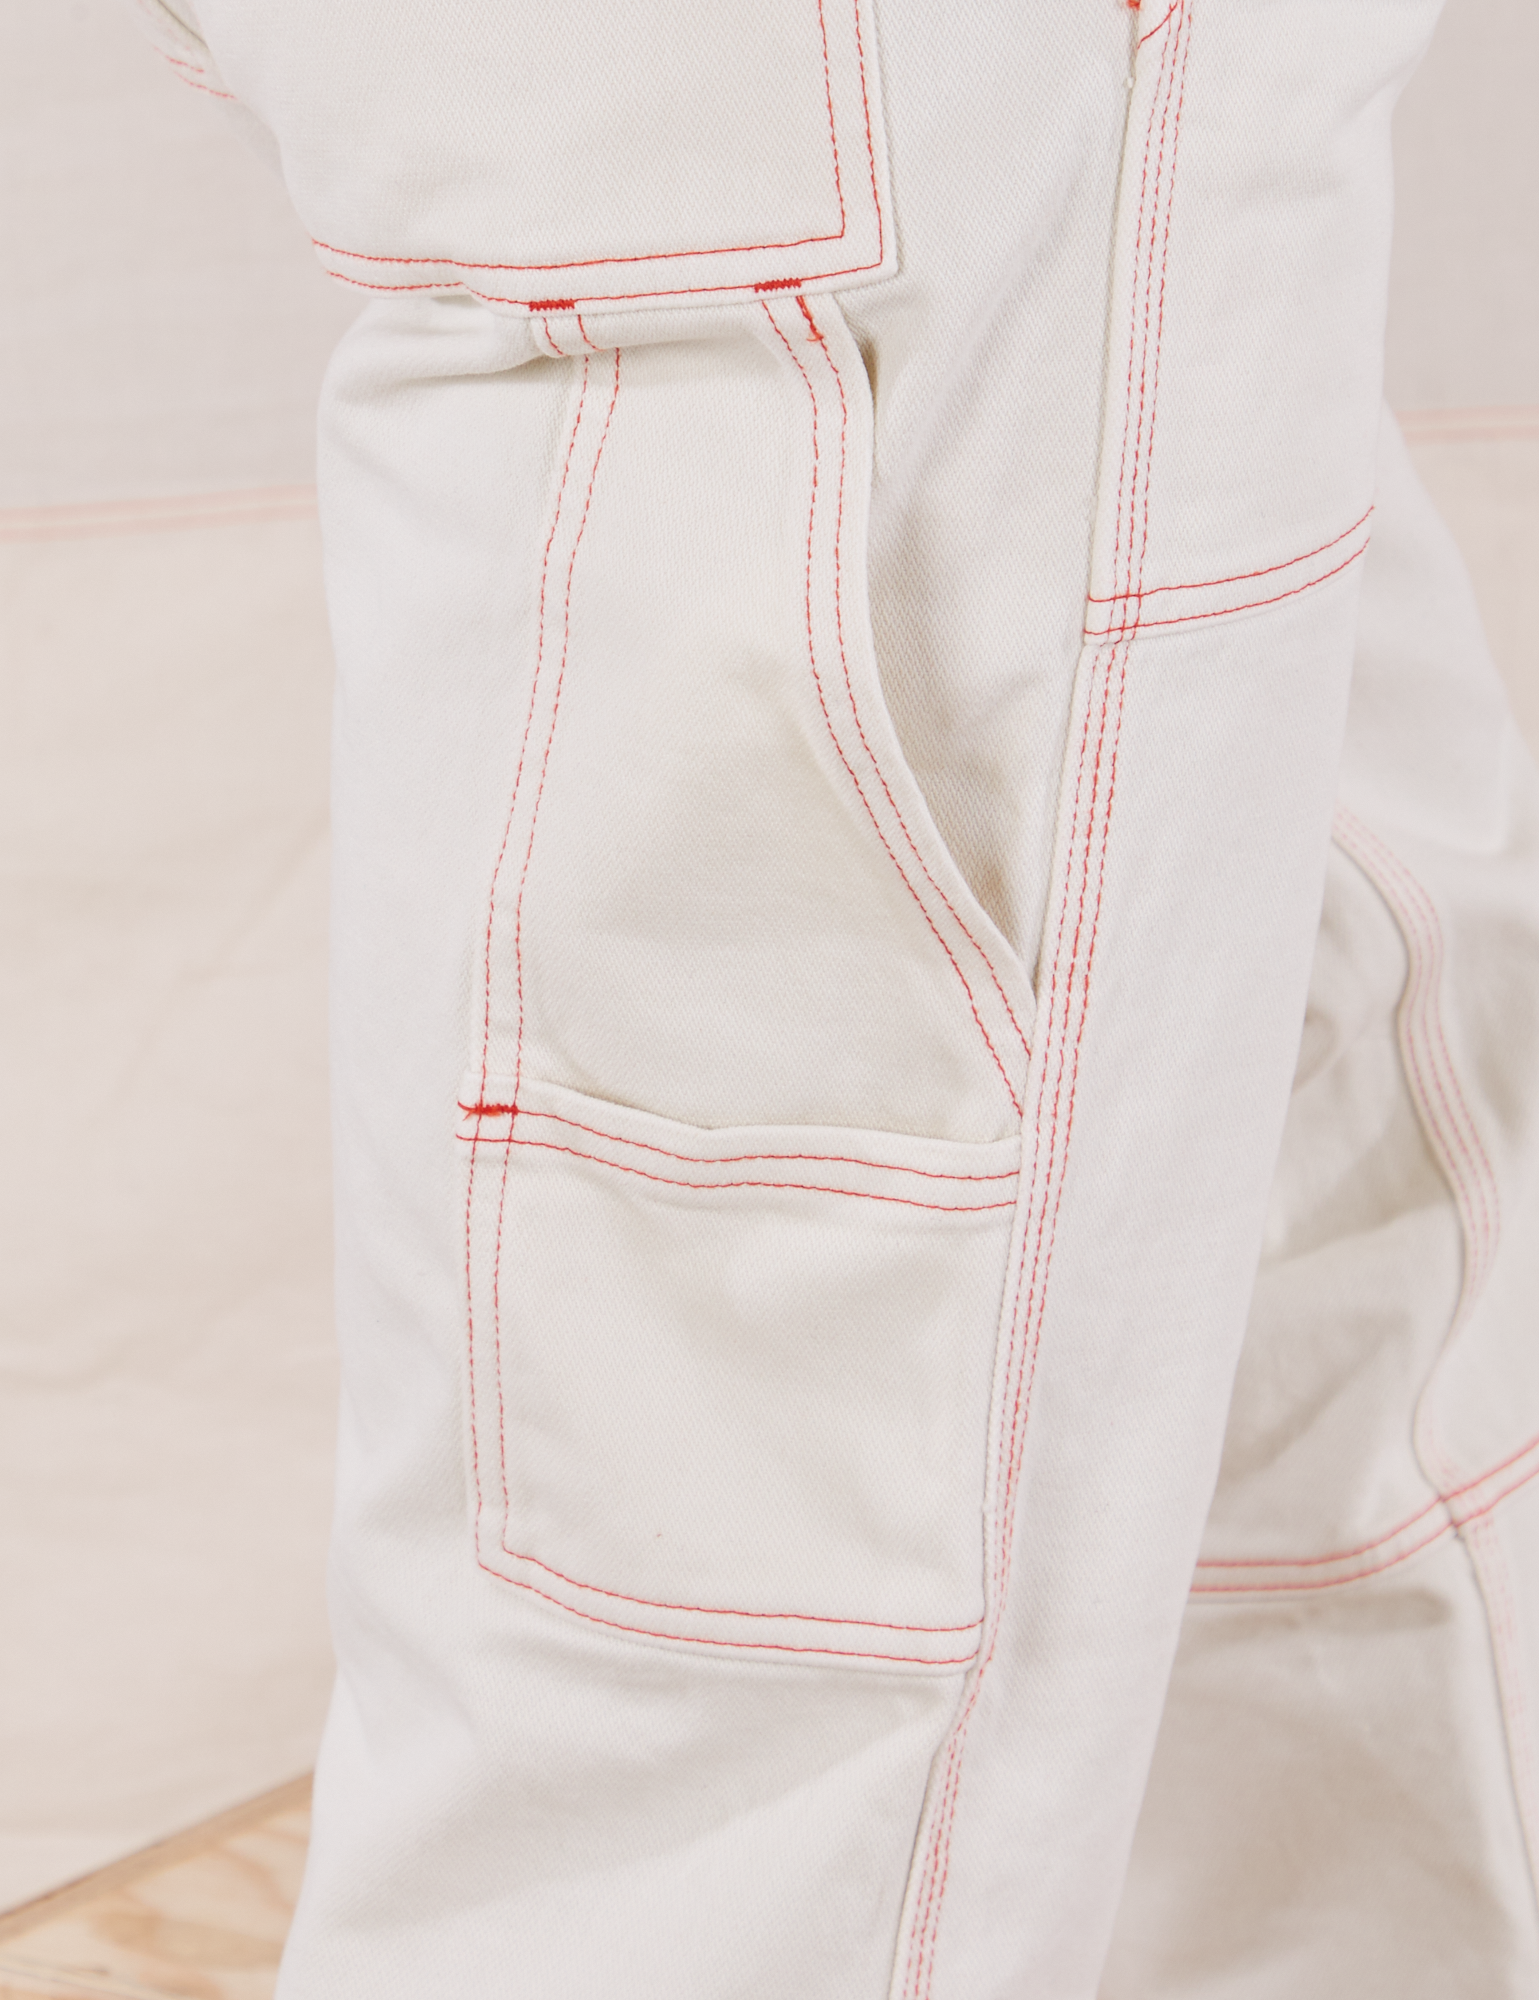 Carpenter Jeans in Vintage Off-White pant leg close up of contrast orange topstitching. 